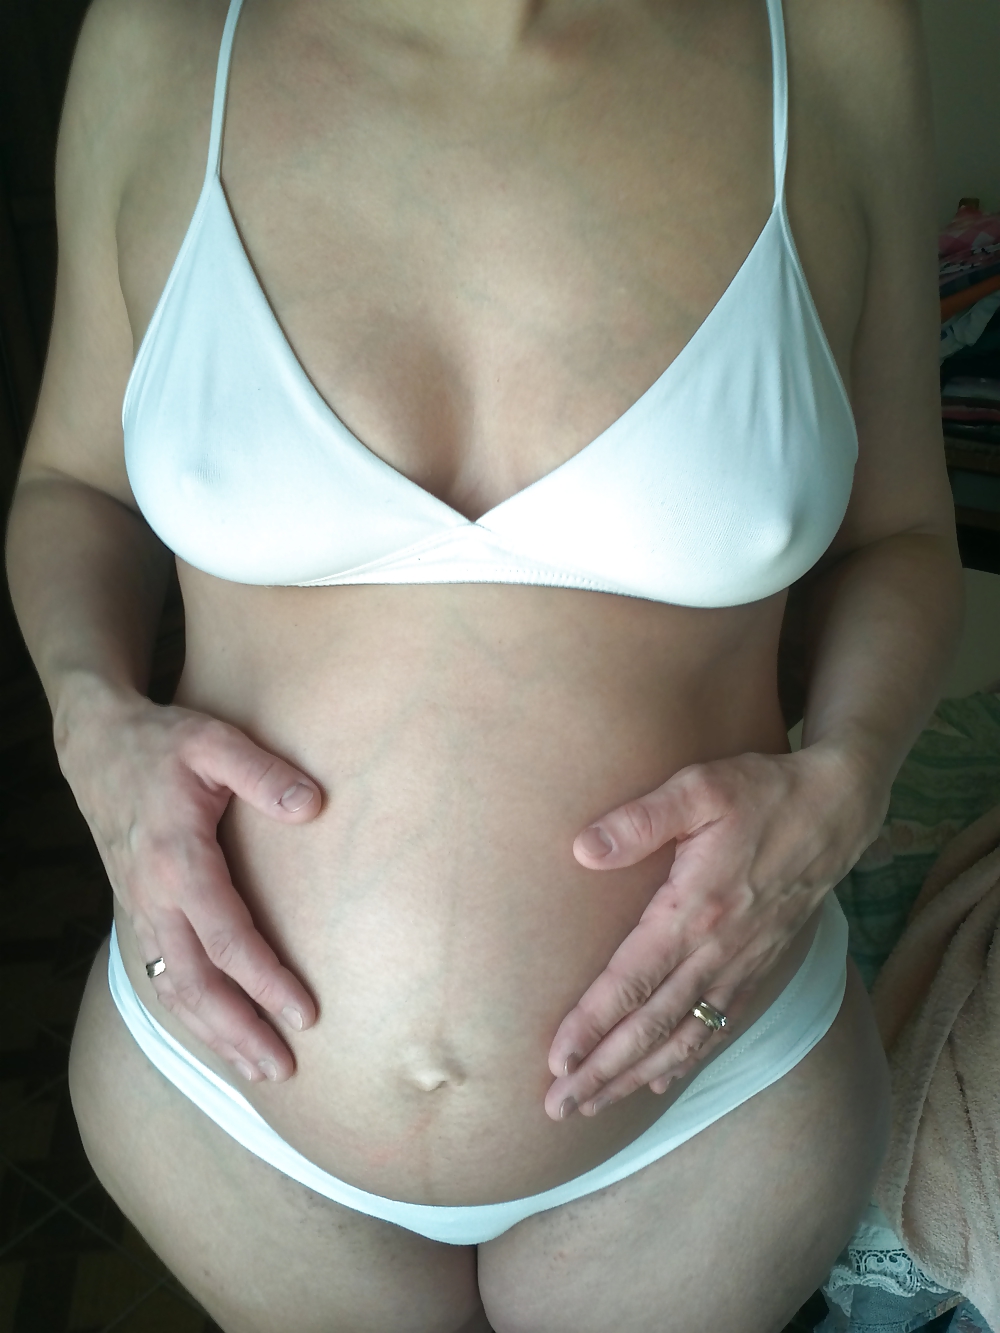 My wife pregnant porn gallery